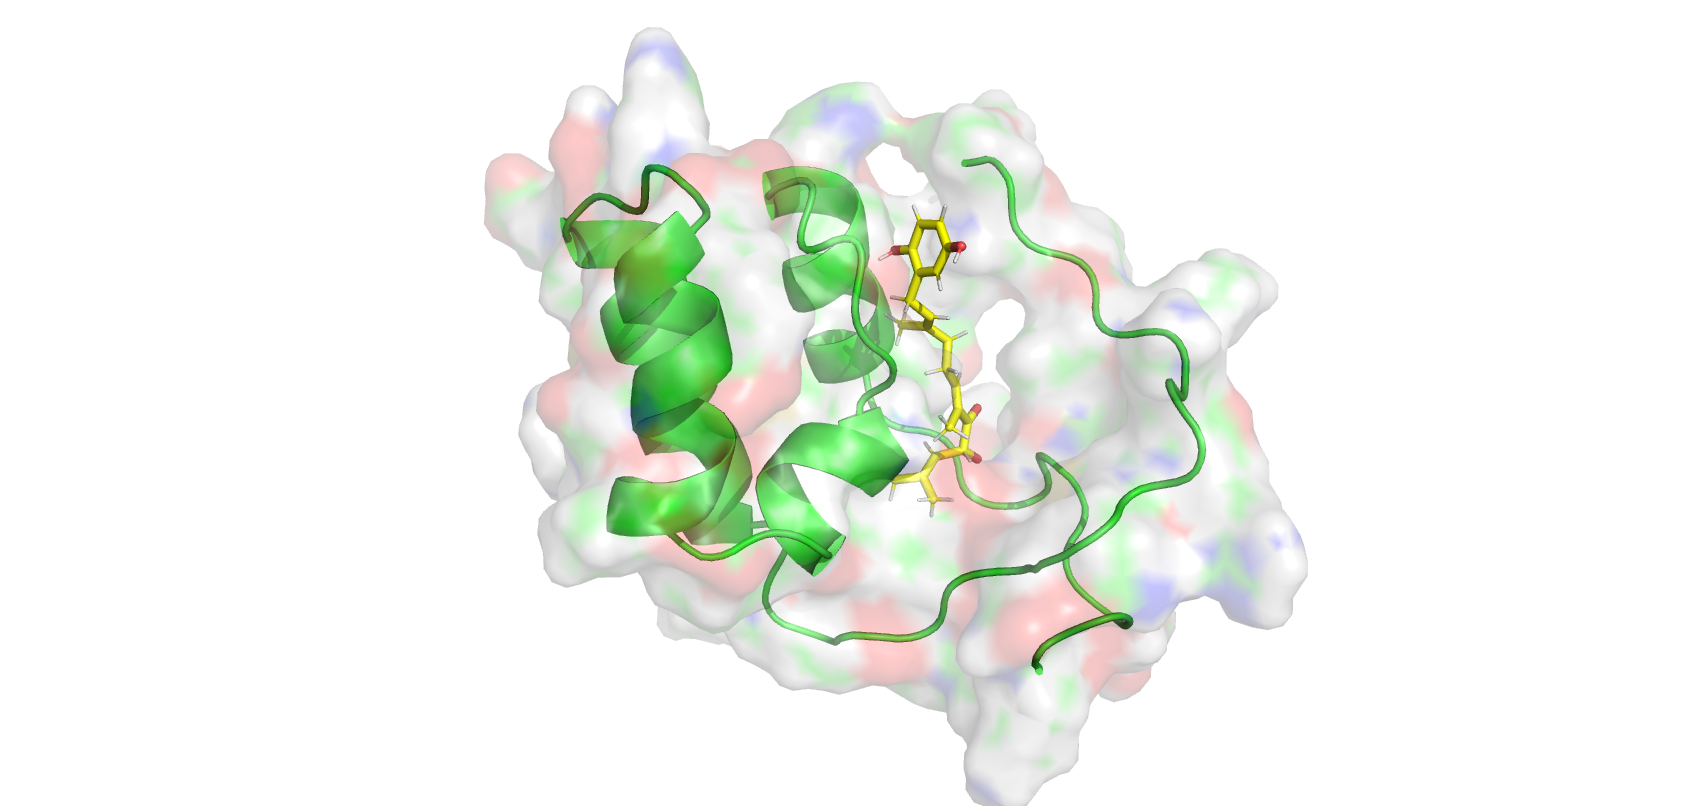 PyMol representation of extracted frame1 from the trajectory